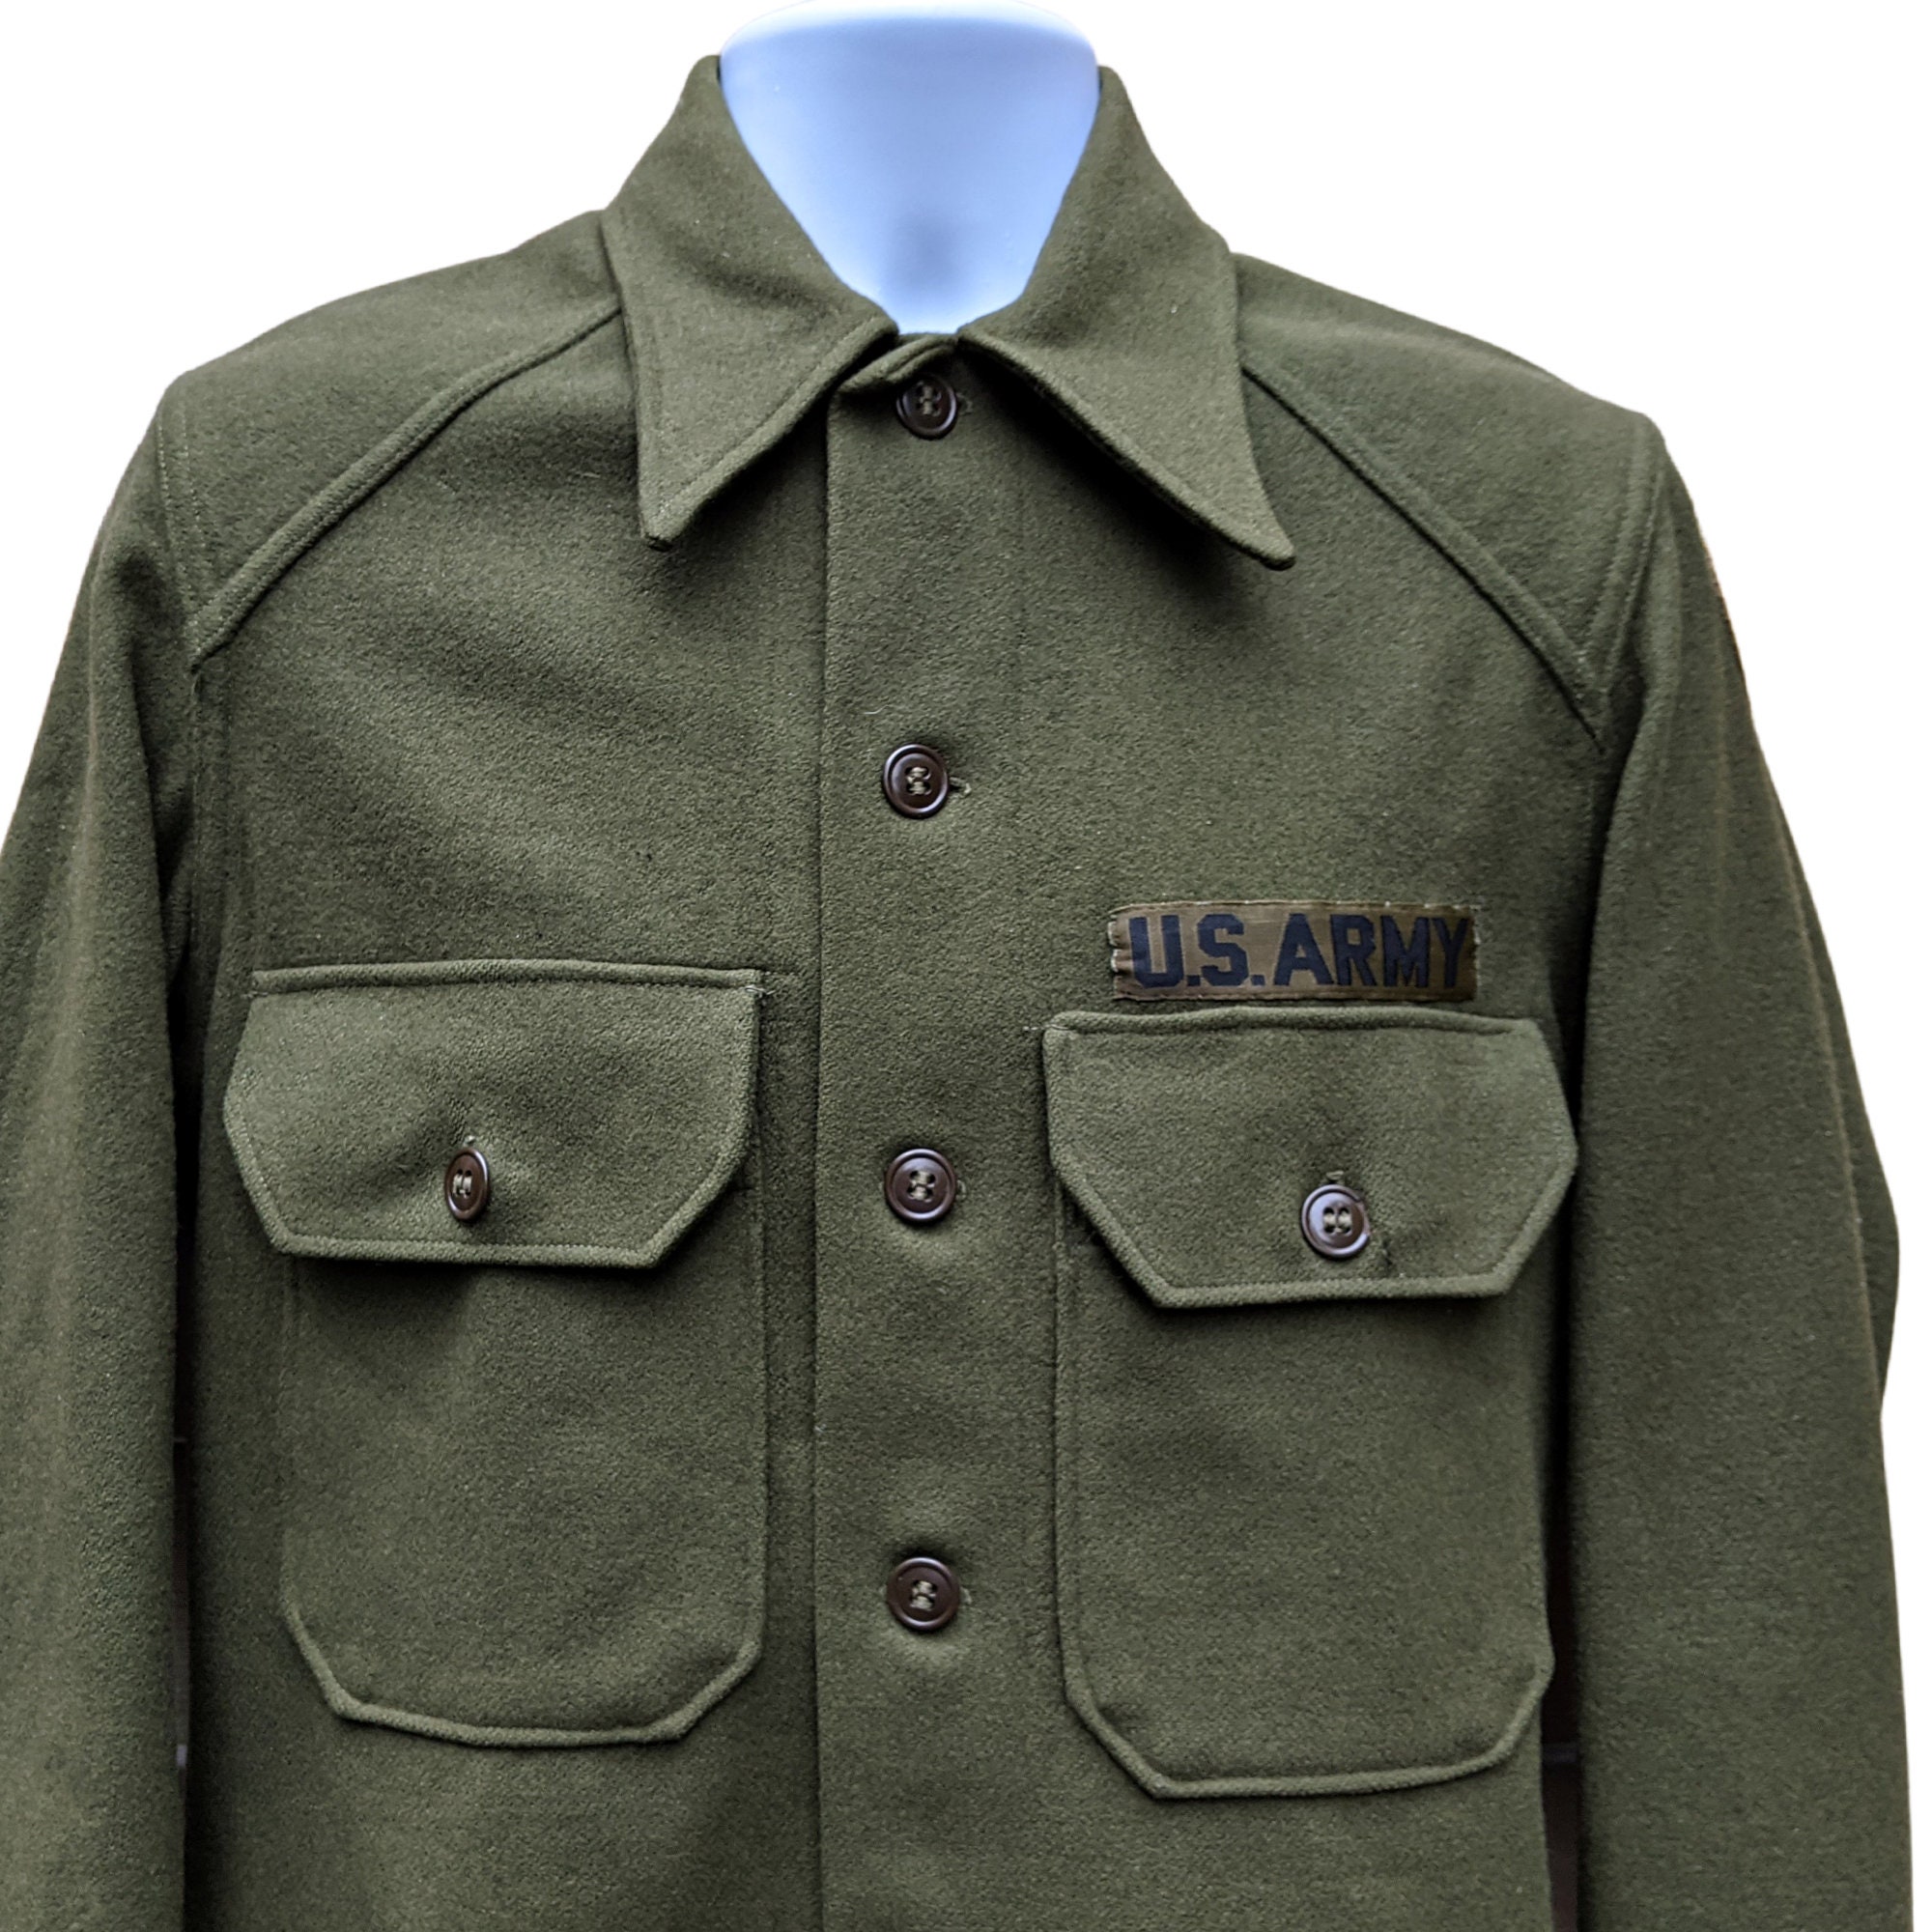 Buy Vintage 50s US Army Green Wool Shirt Jacket With Shield Shaped